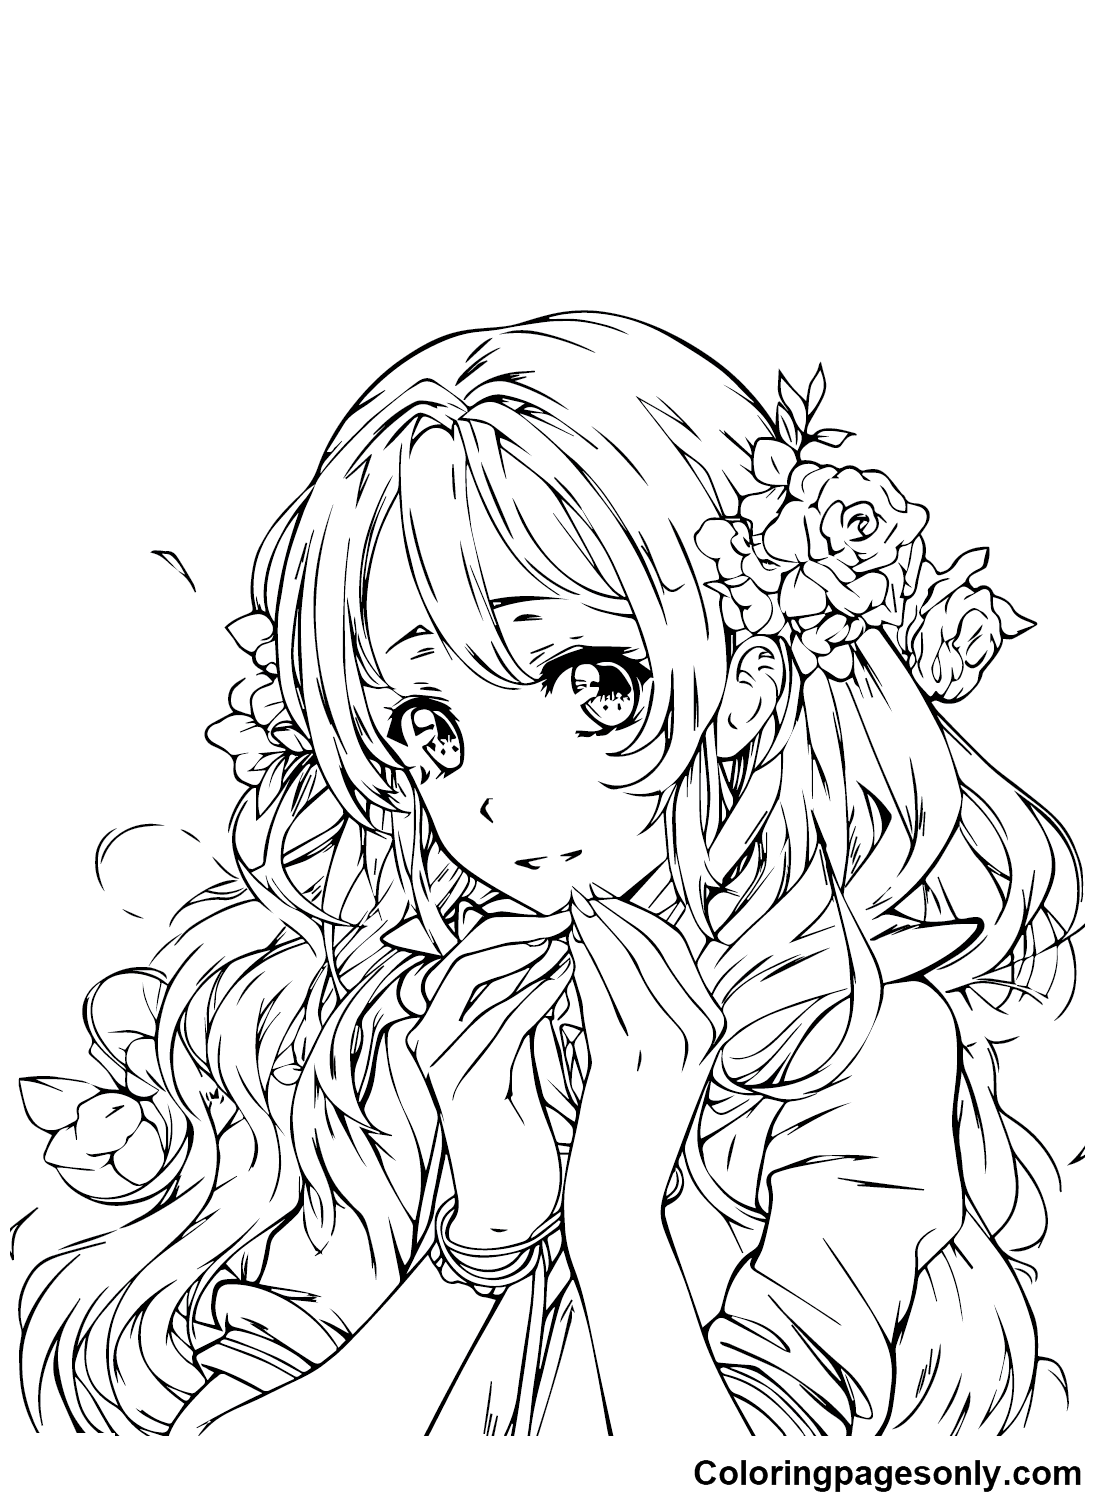 Lovely Anime Girl Coloring Page - Free Printable Coloring Pages